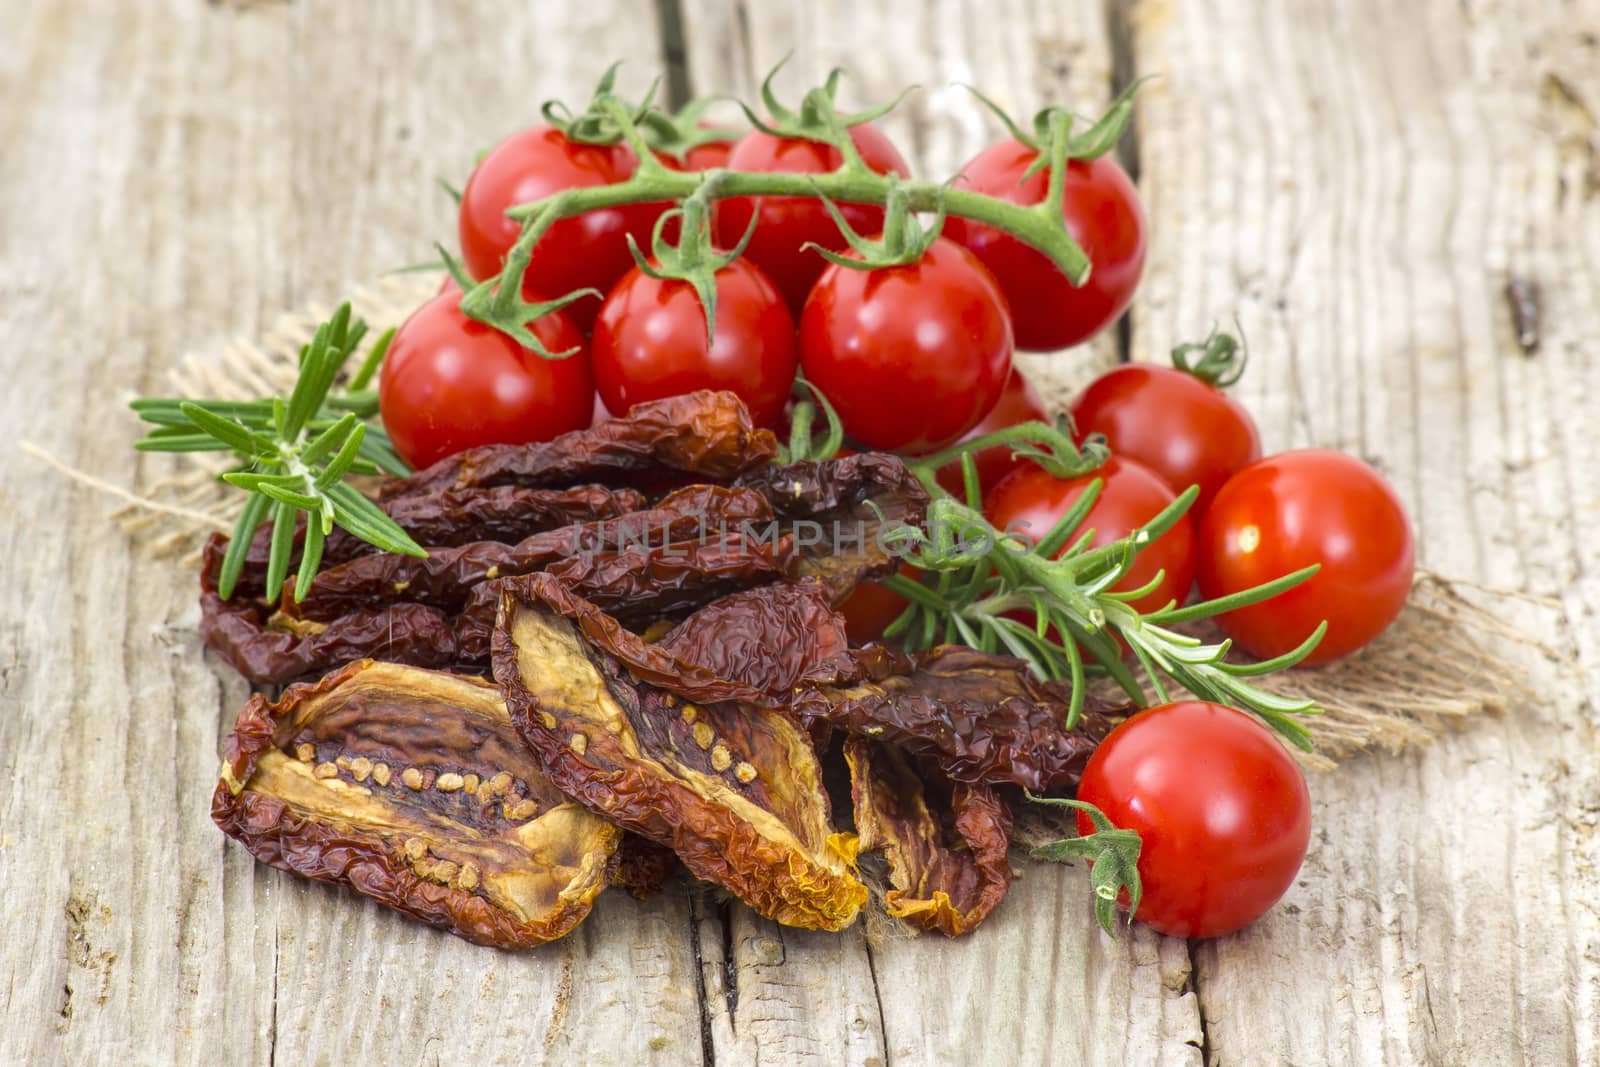 fresh and dried tomatoes on wooden background by miradrozdowski